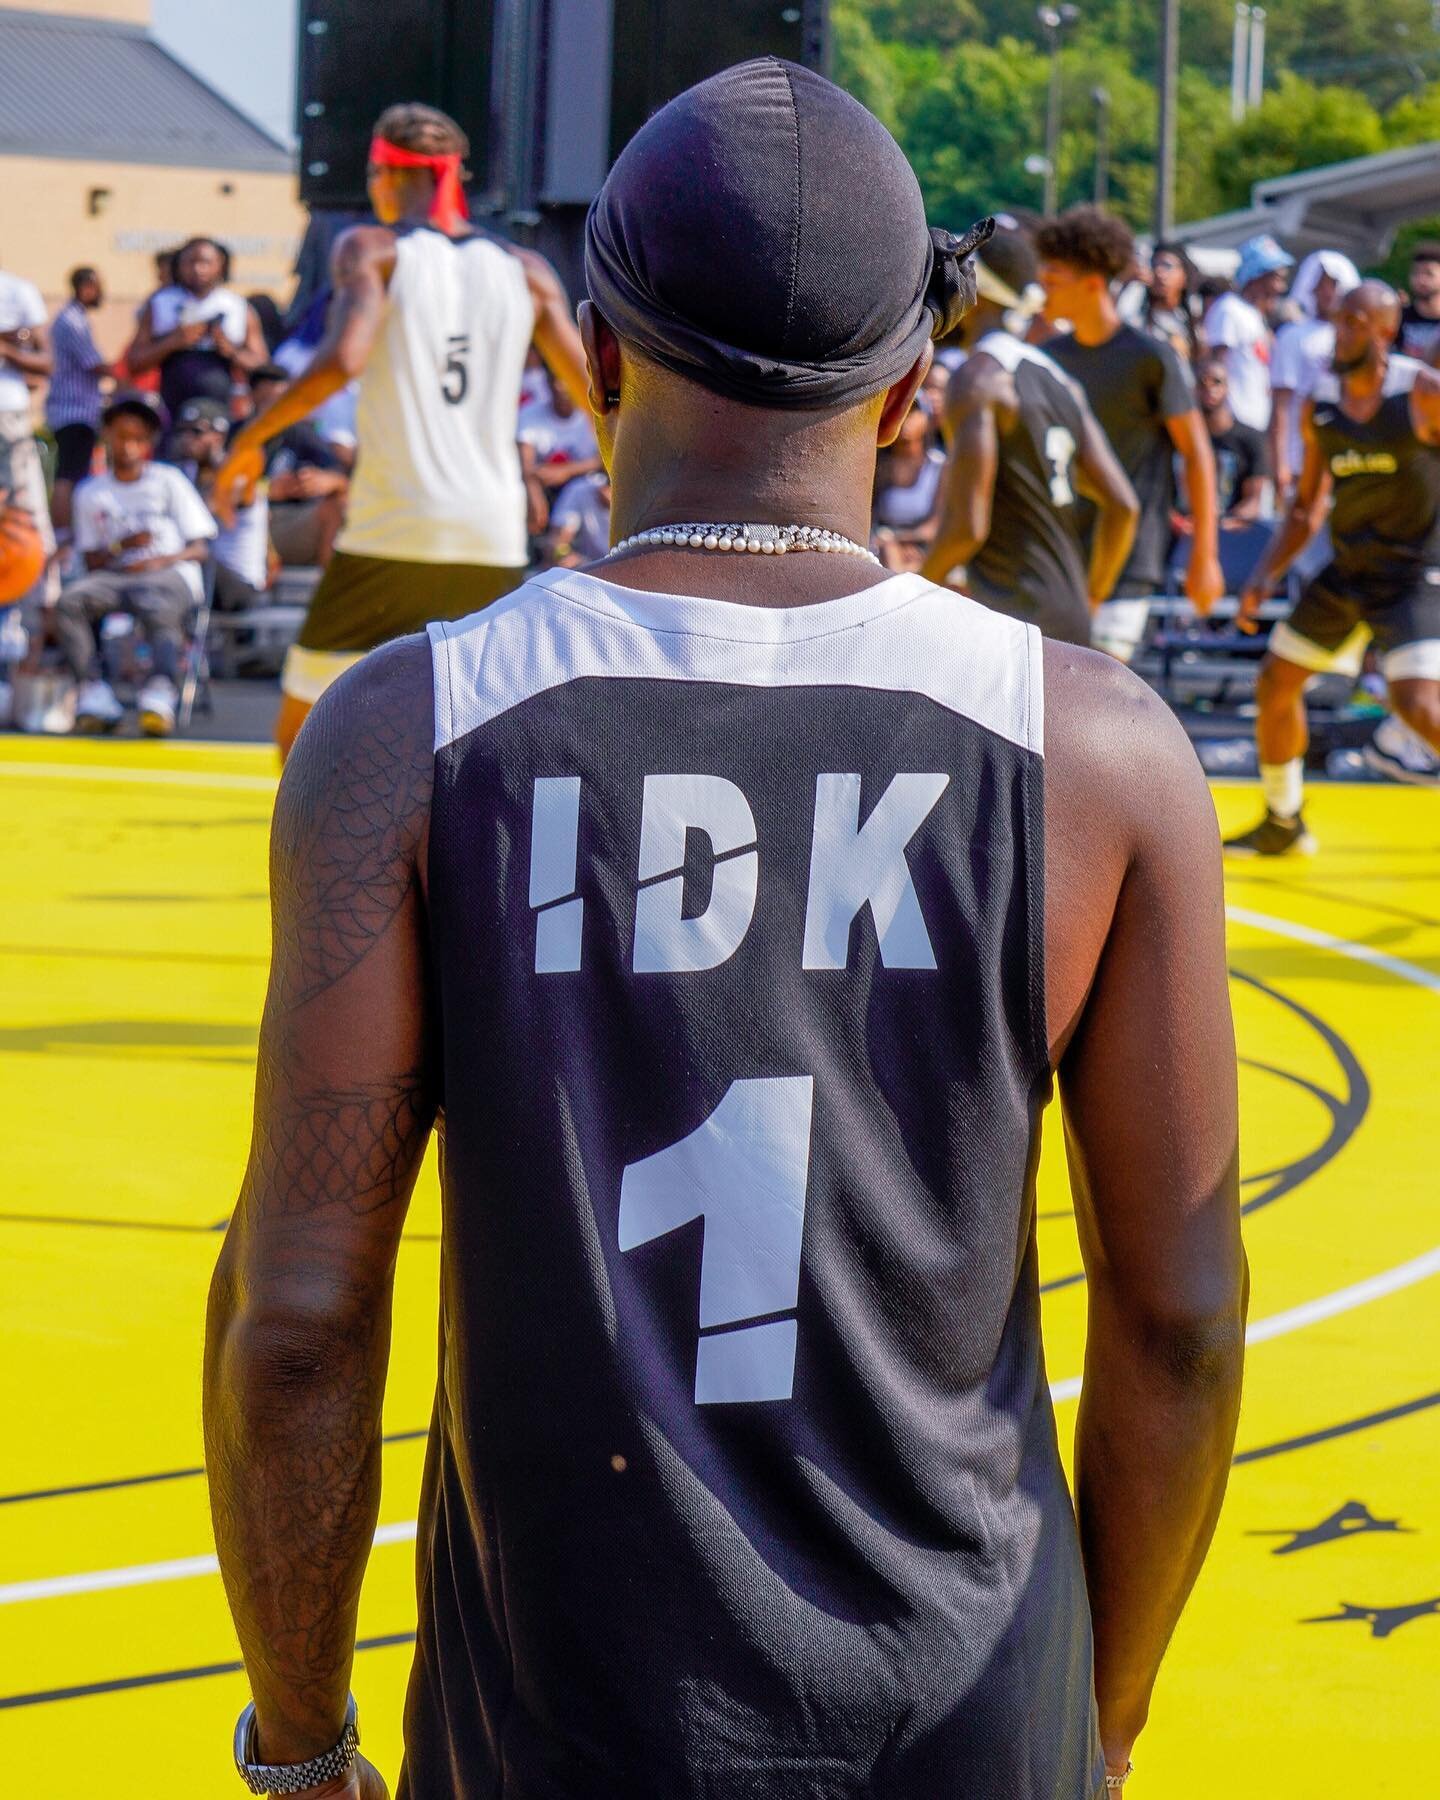 One year ago today, @idk hosted the first annual @projectkkidd family reunion🙌

Photography by @acasey.photos @chapmanimperialphotos @nosiafx